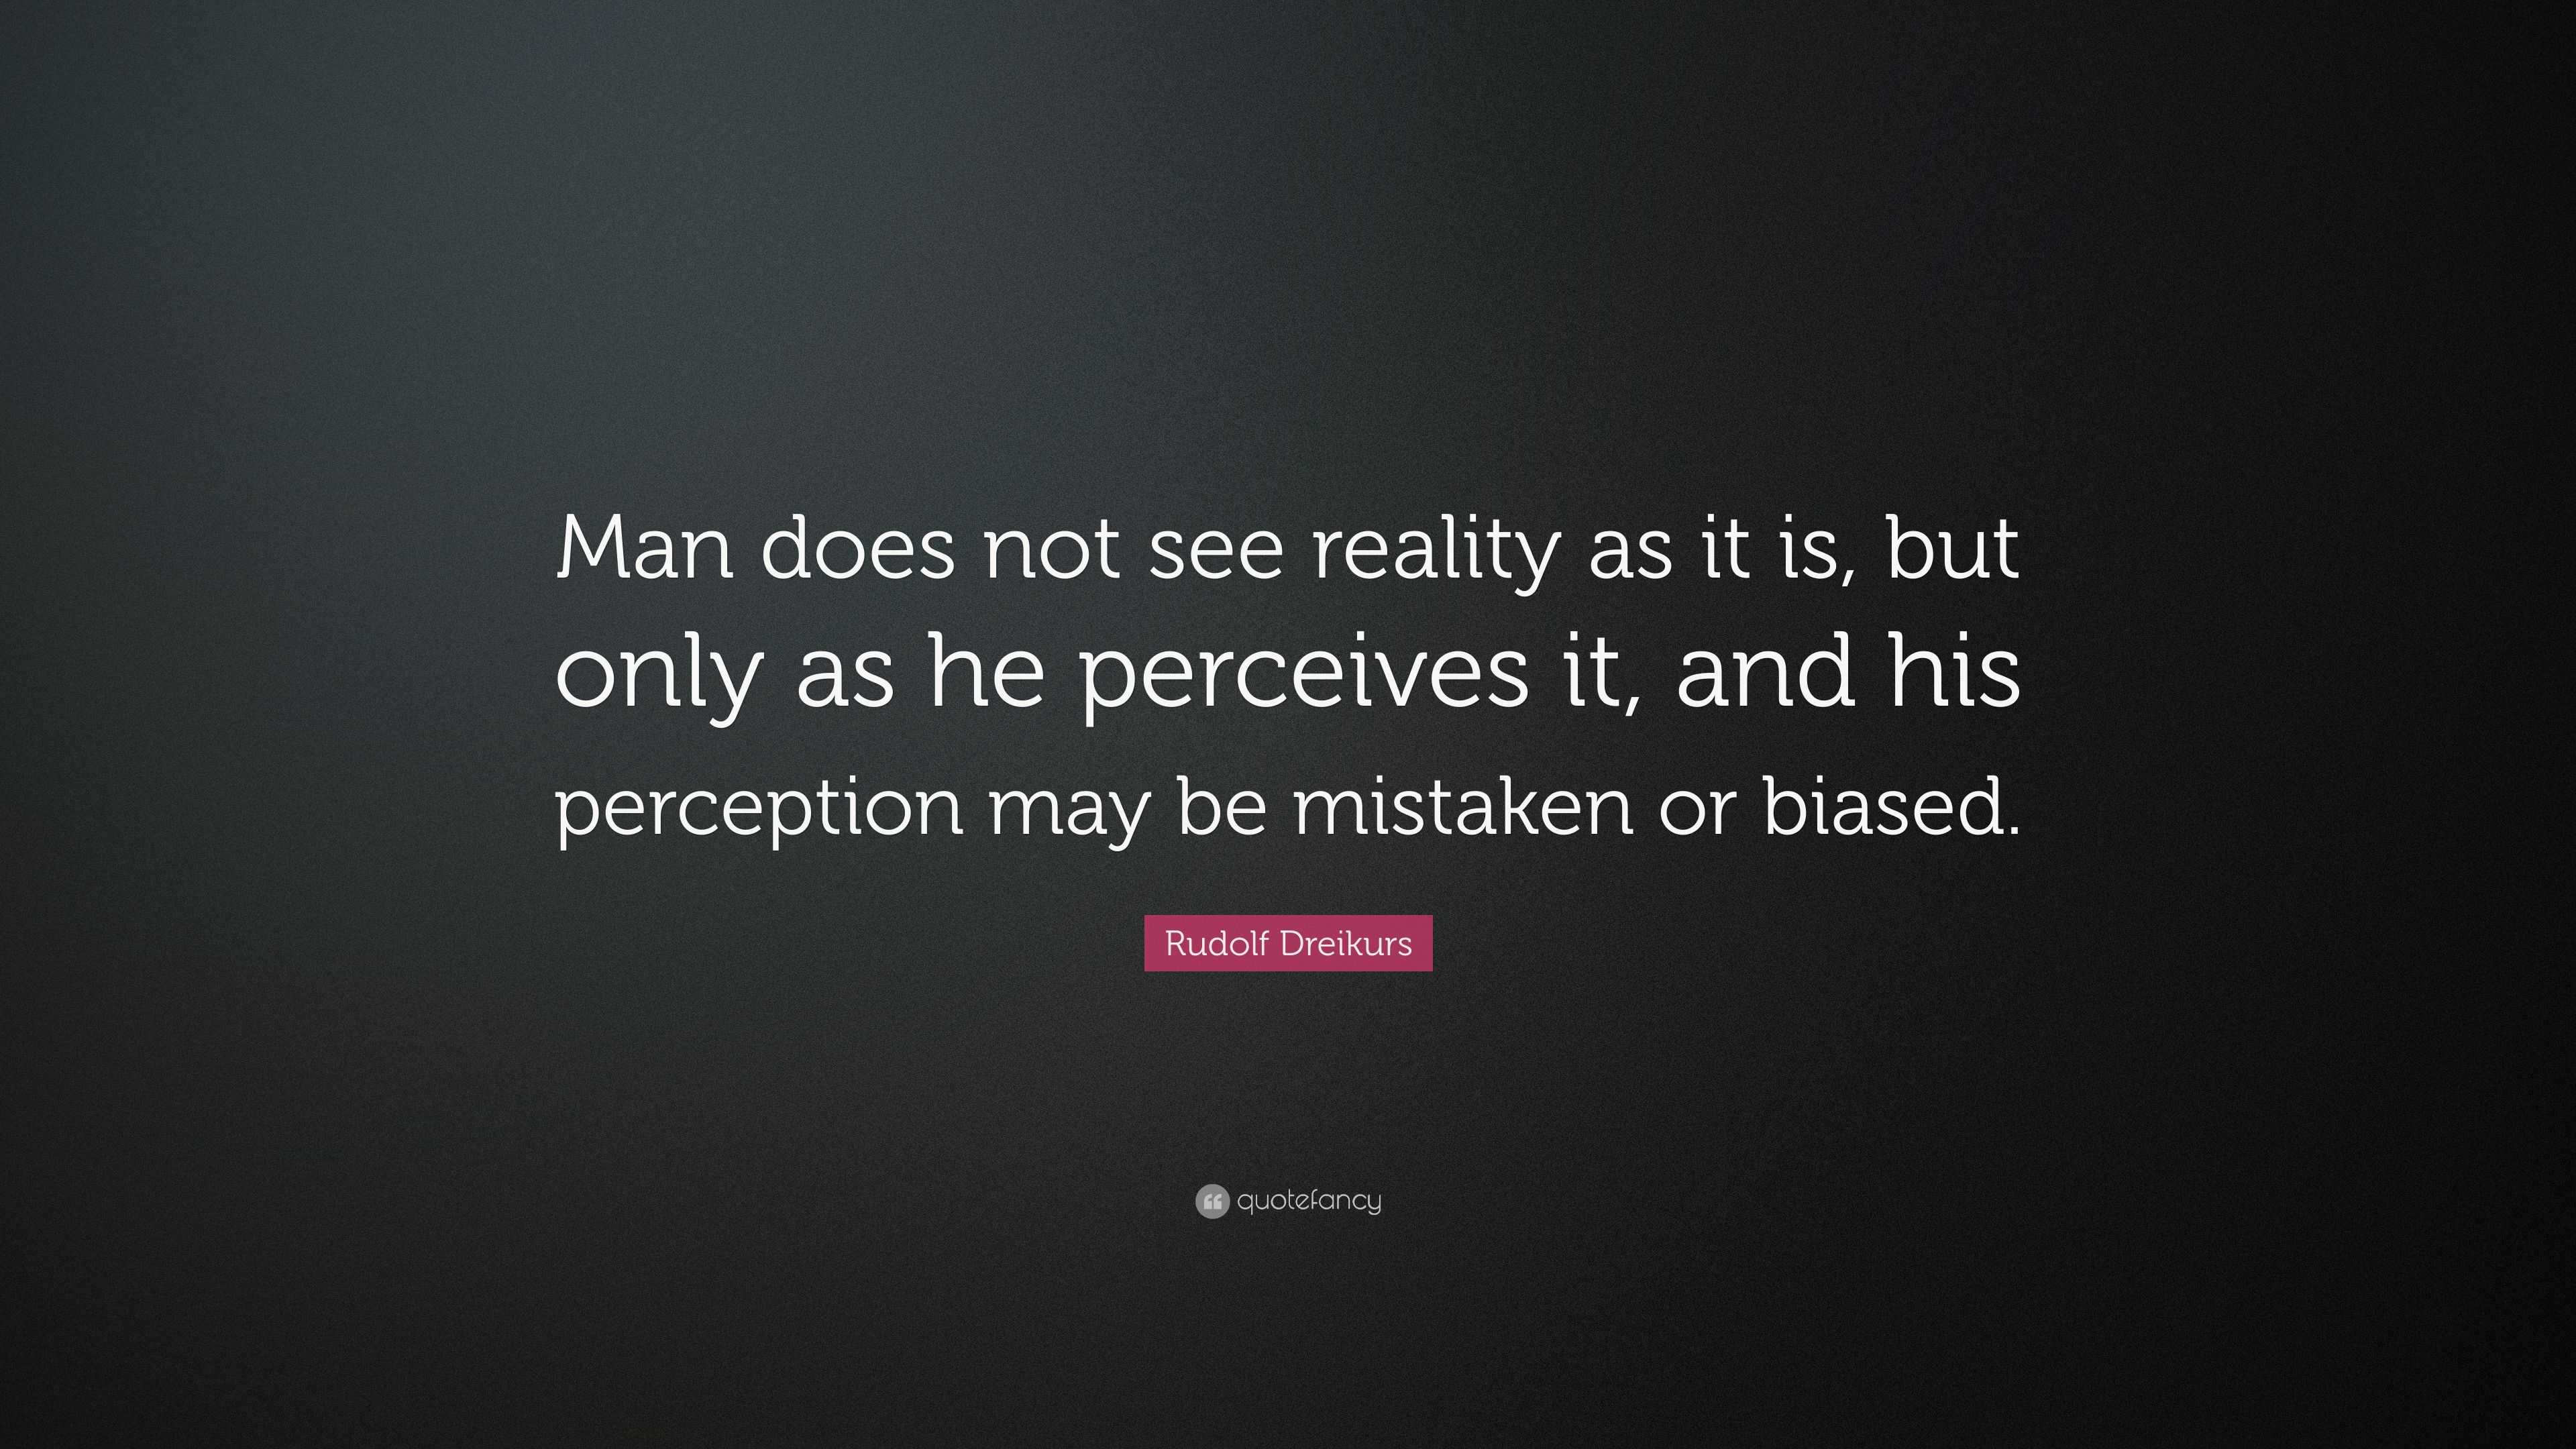 Rudolf Dreikurs Quote: “Man does not see reality as it is, but only as ...